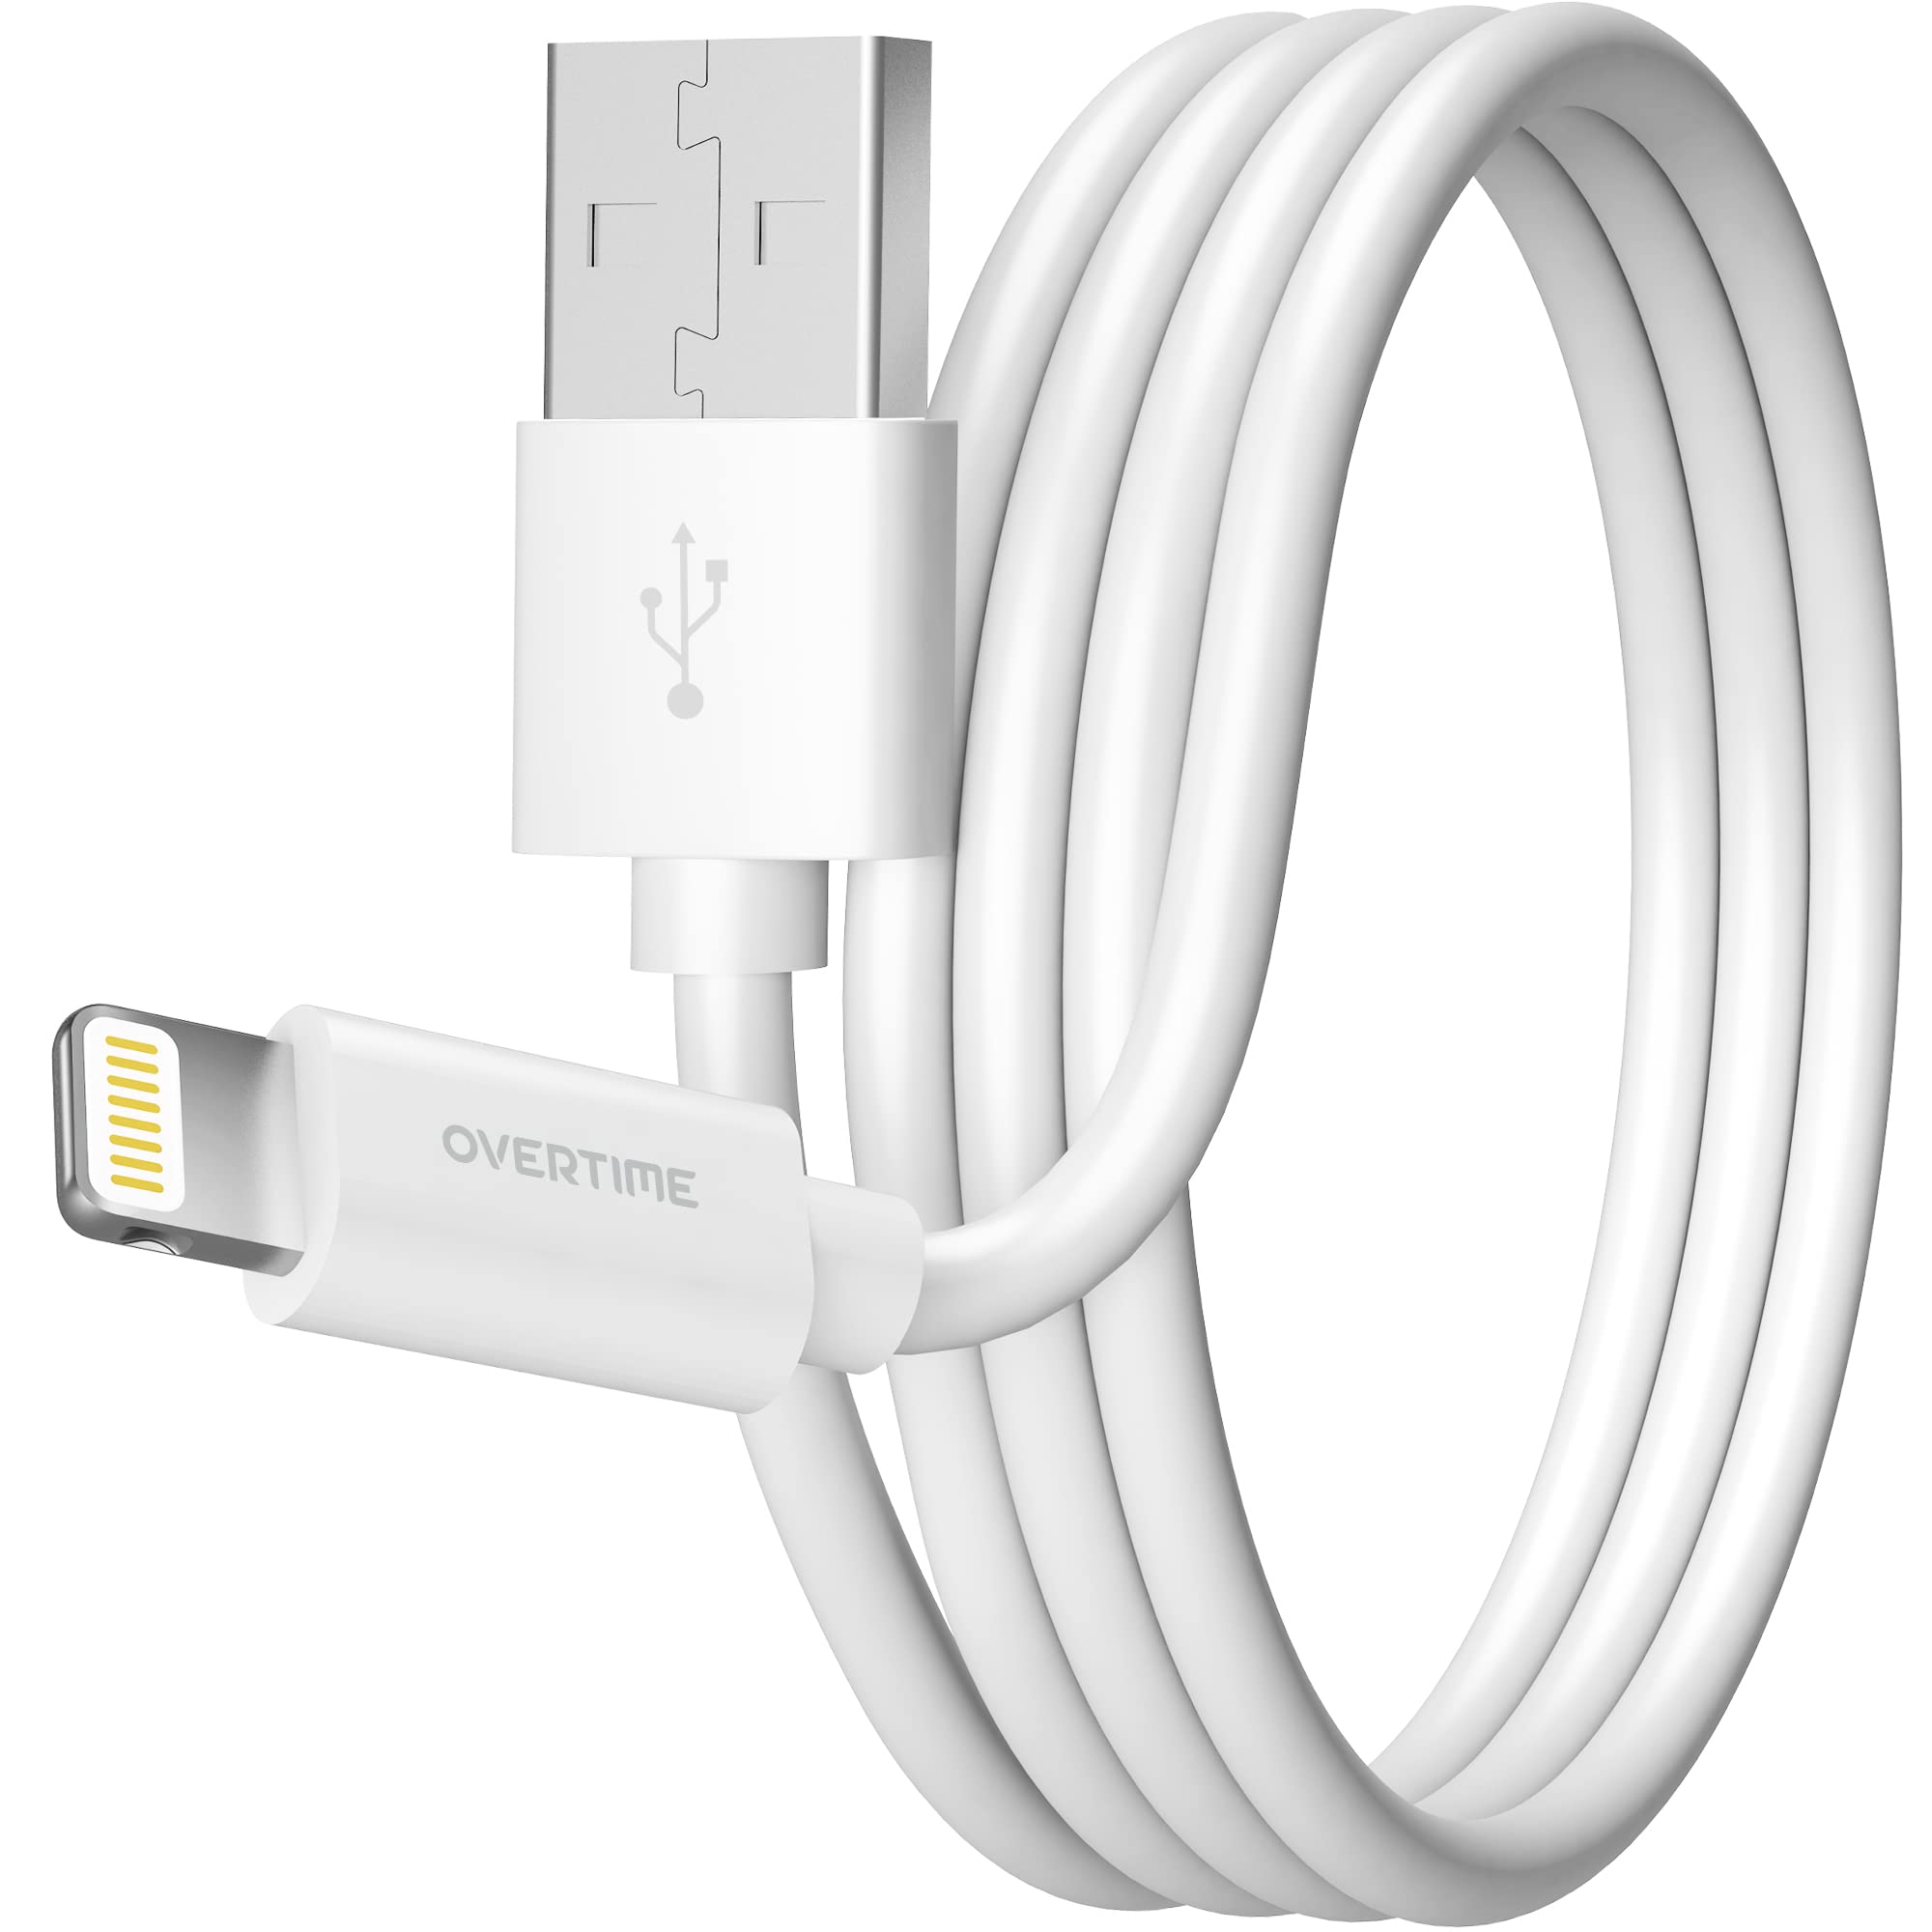 Book Cover Overtime iPhone Charger Cable 6 Foot, Apple MFi Certified Lightning Cable 6ft USB Cord for iPhone 14/13/12/11/Pro/Max/Mini/SE/XR/XS/X/8/7/Plus/6/6S, iPad/iPad Air 2/Mini 4/3/2, White